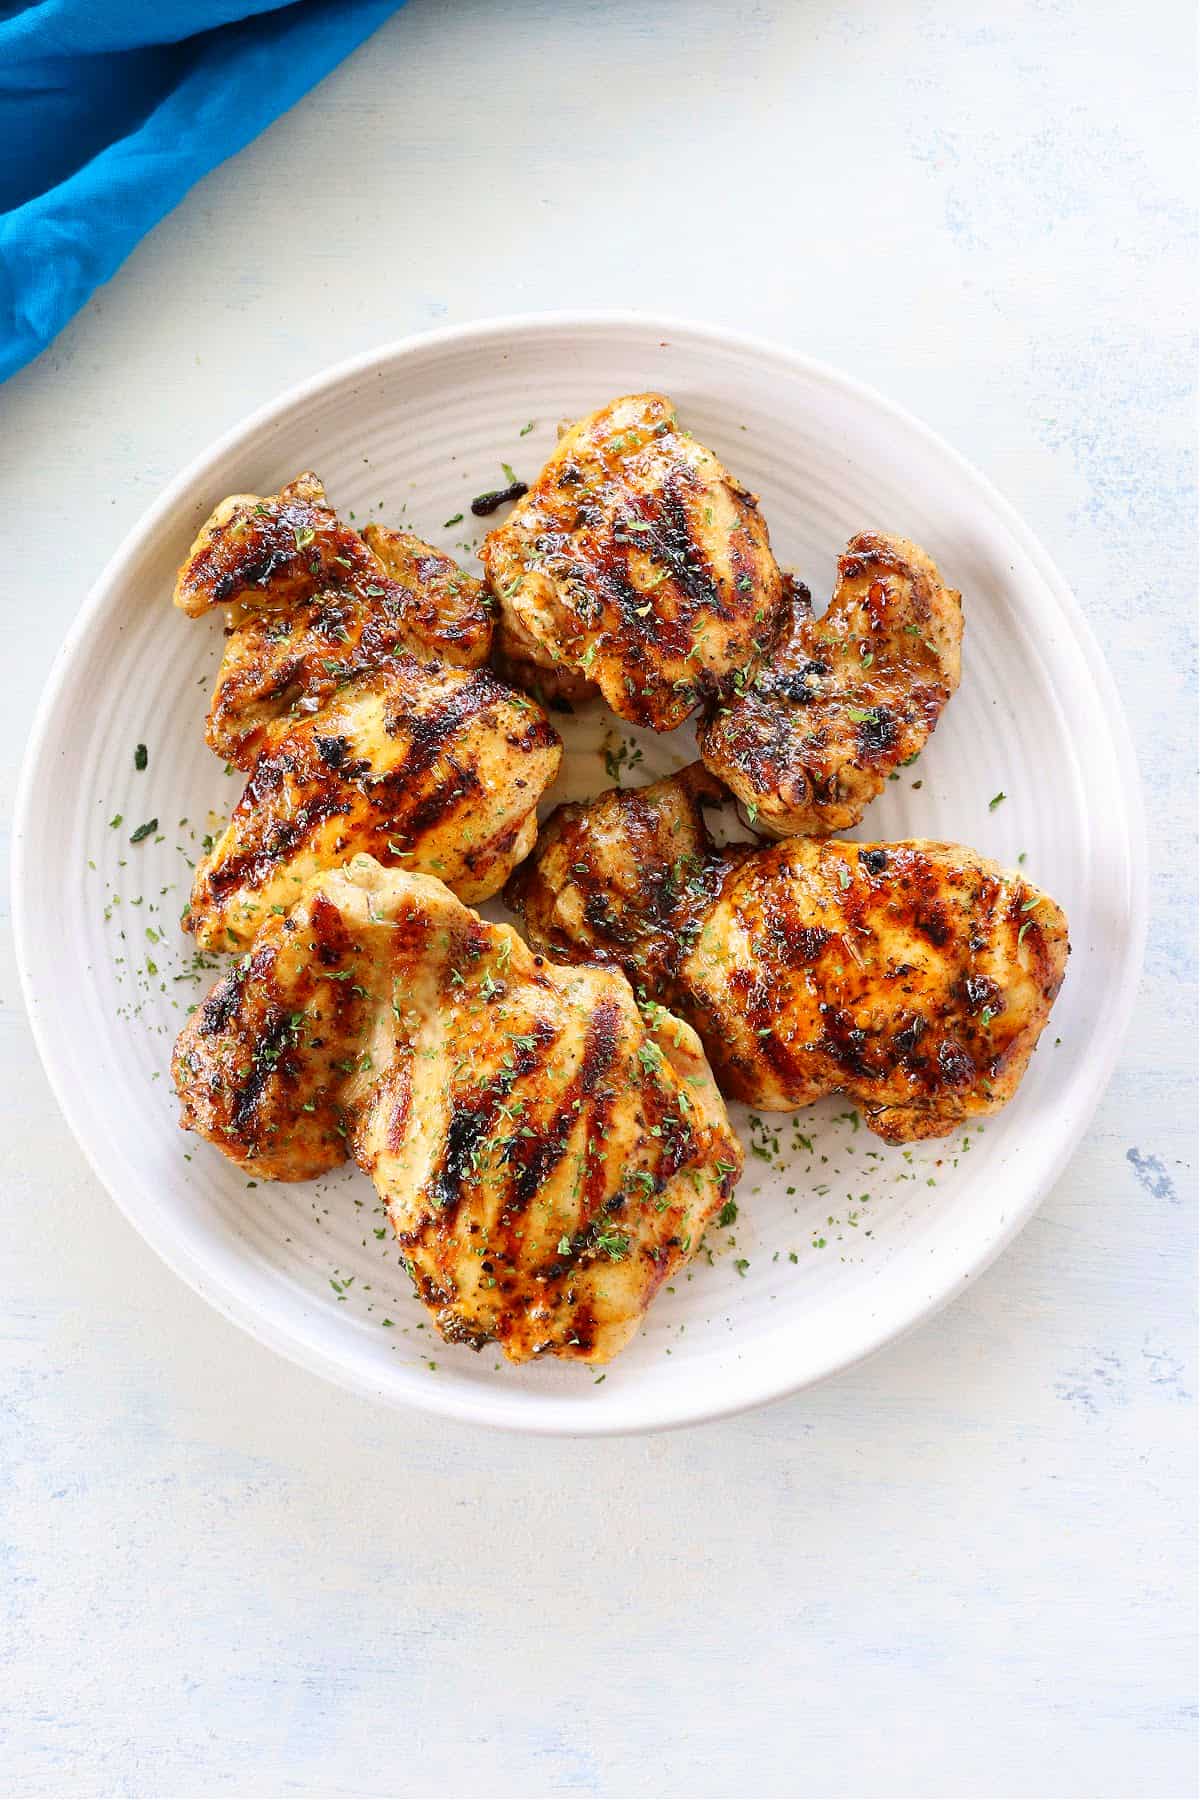 Grilled chicken thighs on white plate.